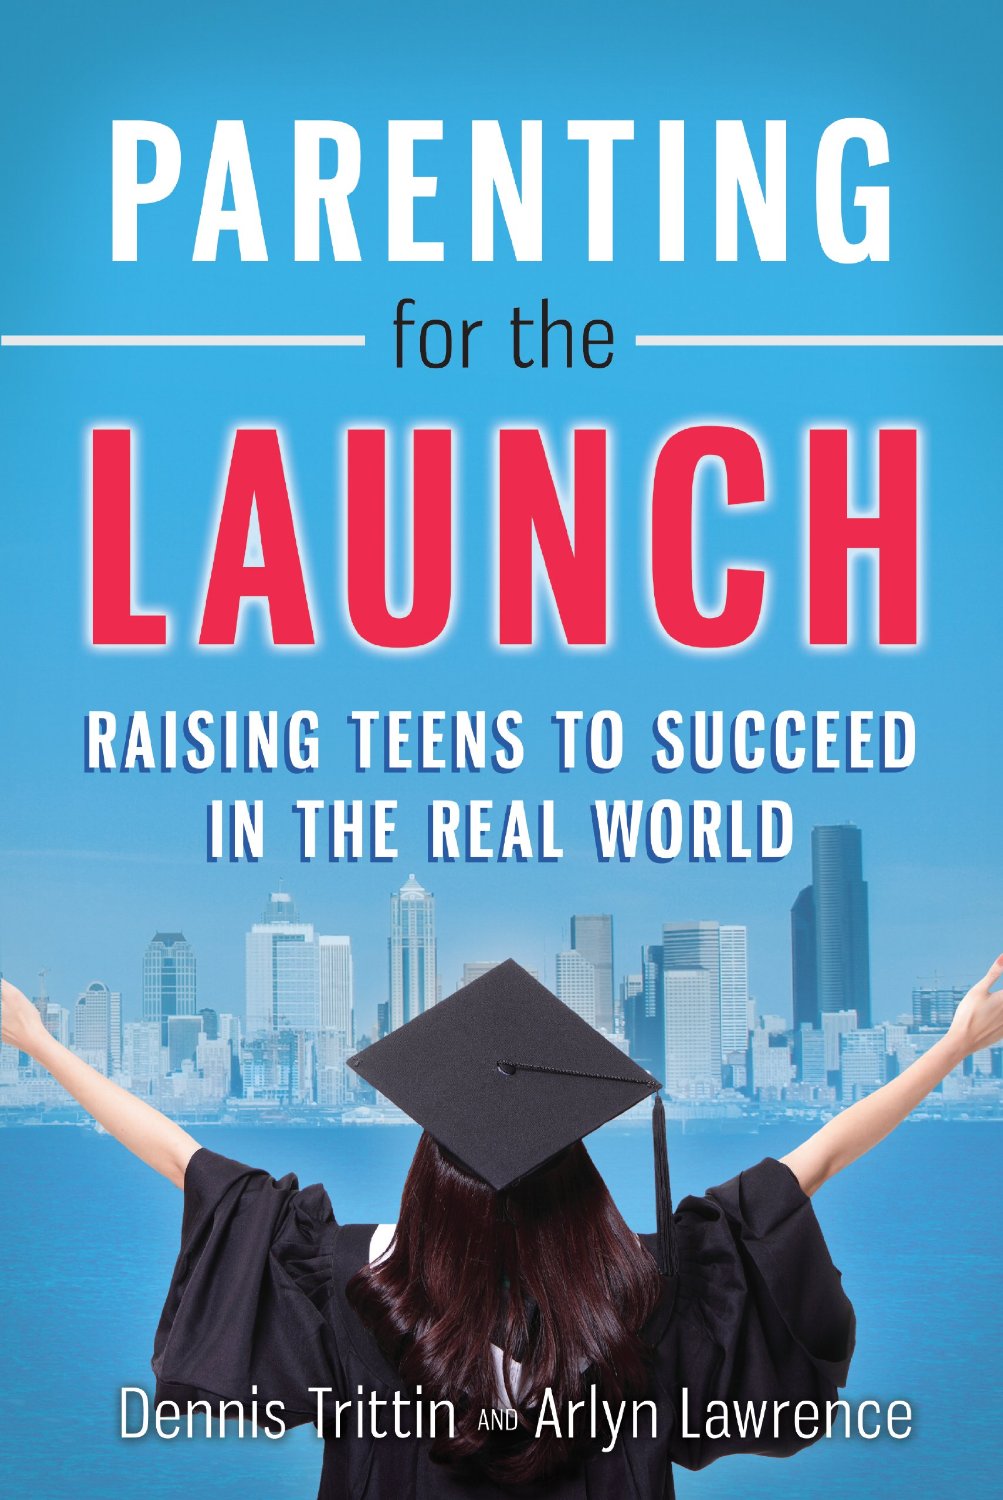 Book Review: Parenting for Launch by Dennis Trittin and Arlyn Lawrence